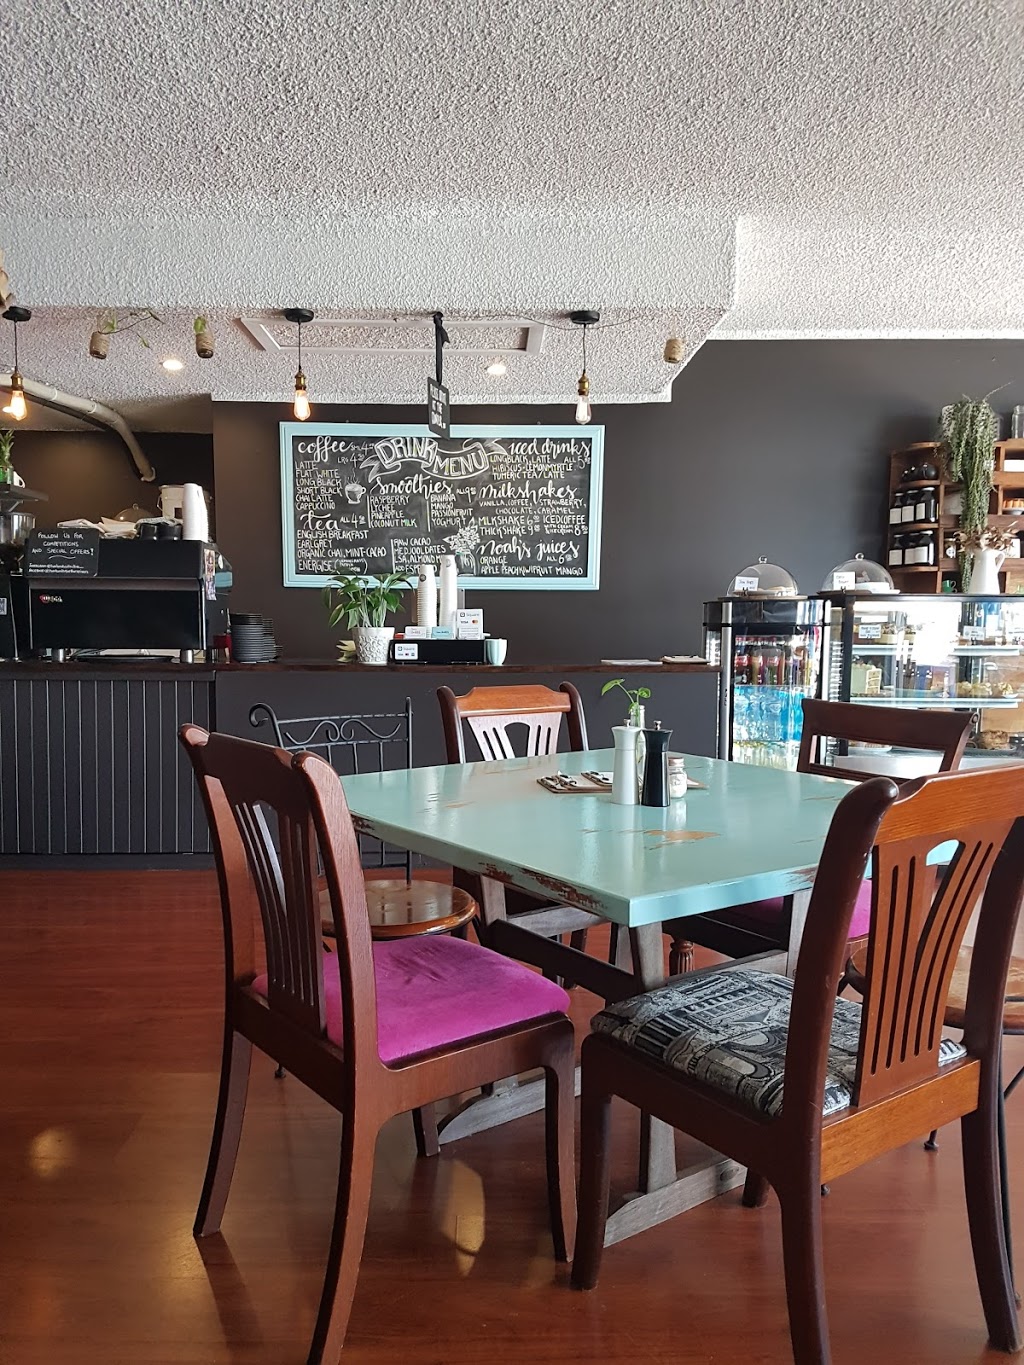 Two Hands Cafe | cafe | 2 Moon St, Ballina NSW 2478, Australia | 0266867756 OR +61 2 6686 7756